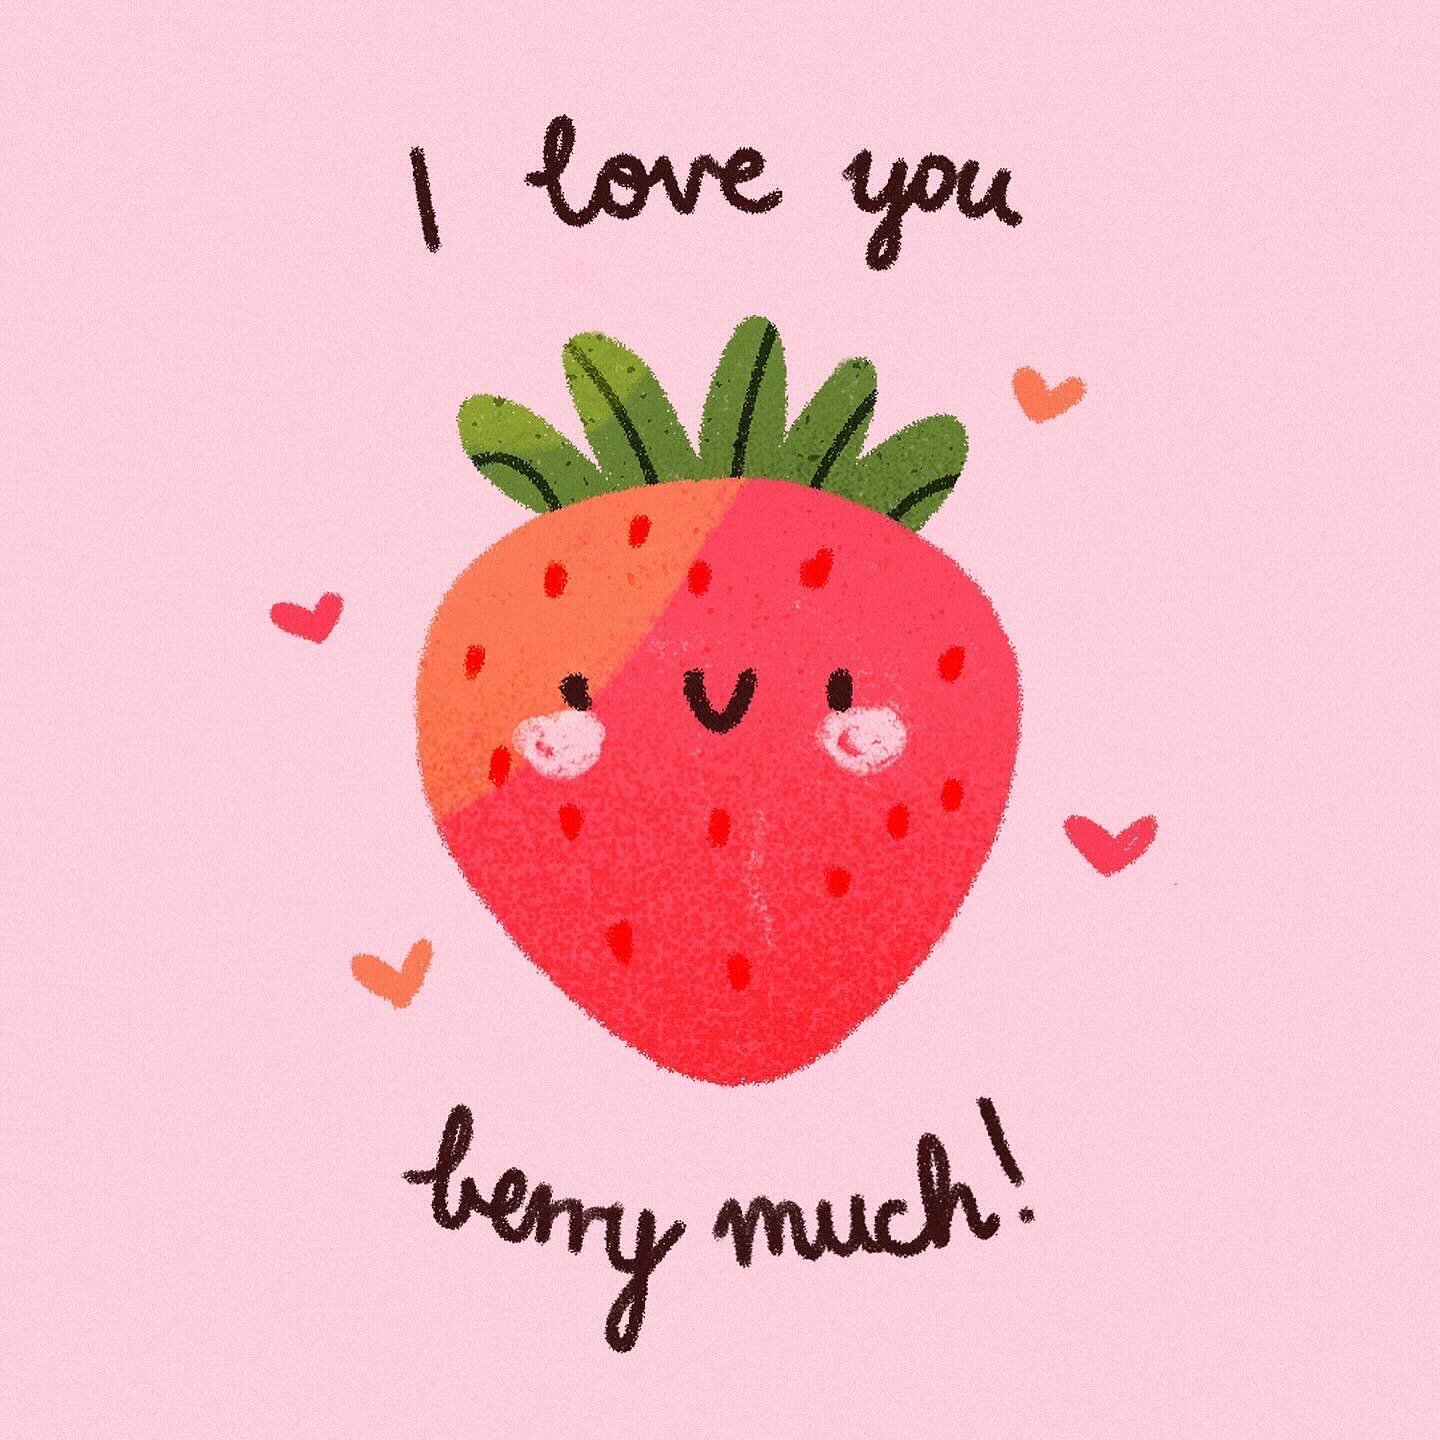 Love you berry much 🍓❤️

A very last-minute addition to the card collection because last minute is the only way I can get things done atm🙃🙃

#iloveyouberrymuch #cutevalentinescard #cutestrawberry #strawberryillustration #strawberrycard #cardcollec